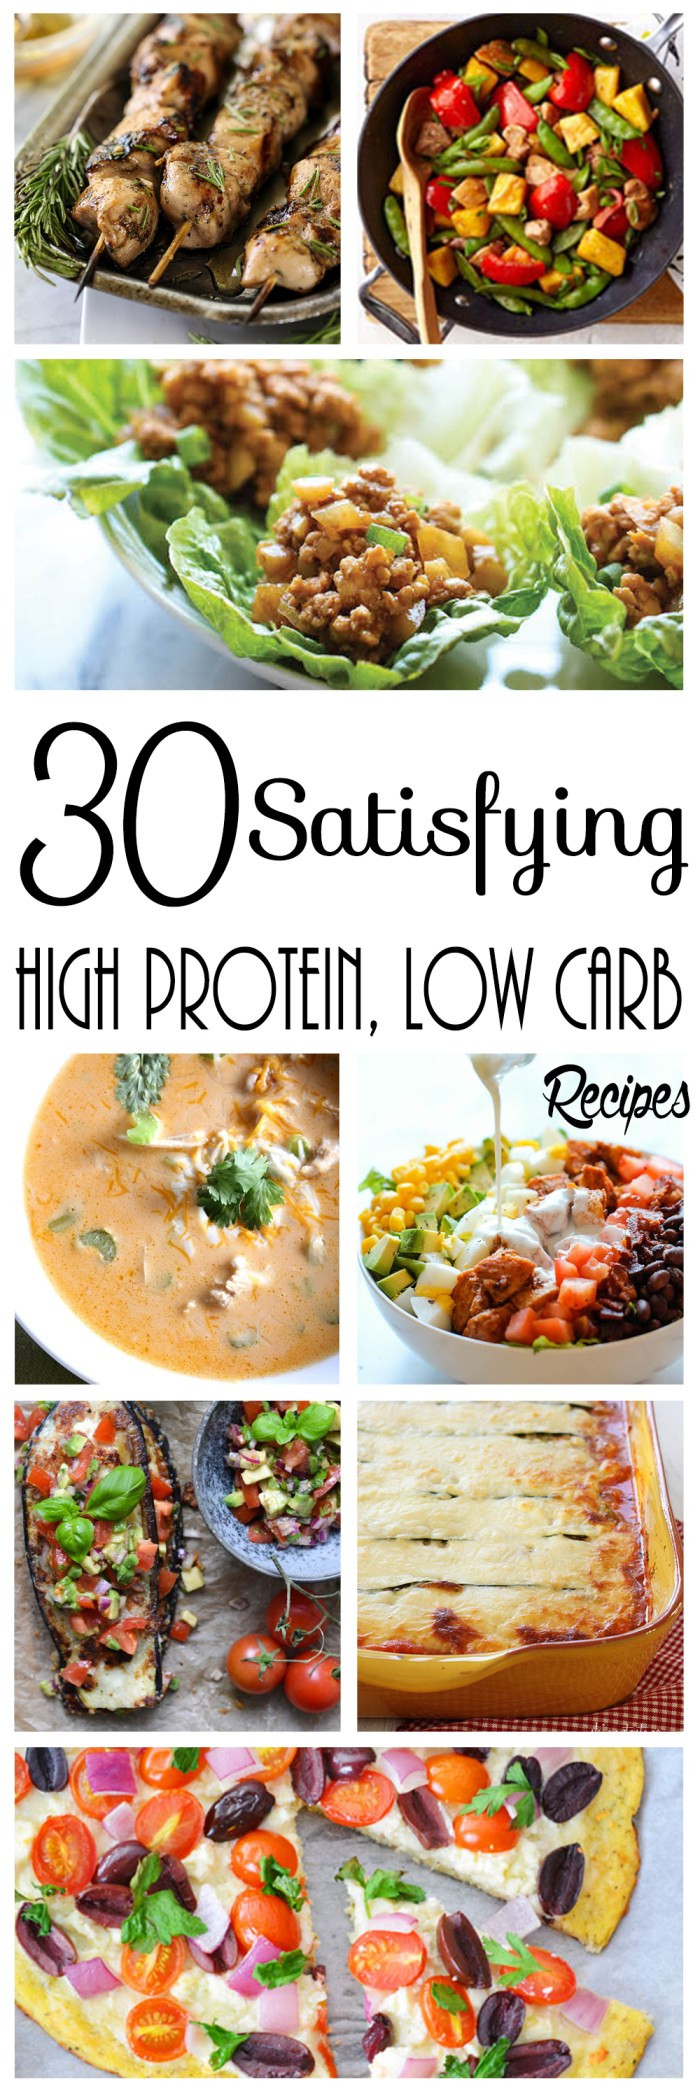 Low Carb High Protein Recipes
 30 Satisfying High Protein Low Carb Recipes P90X